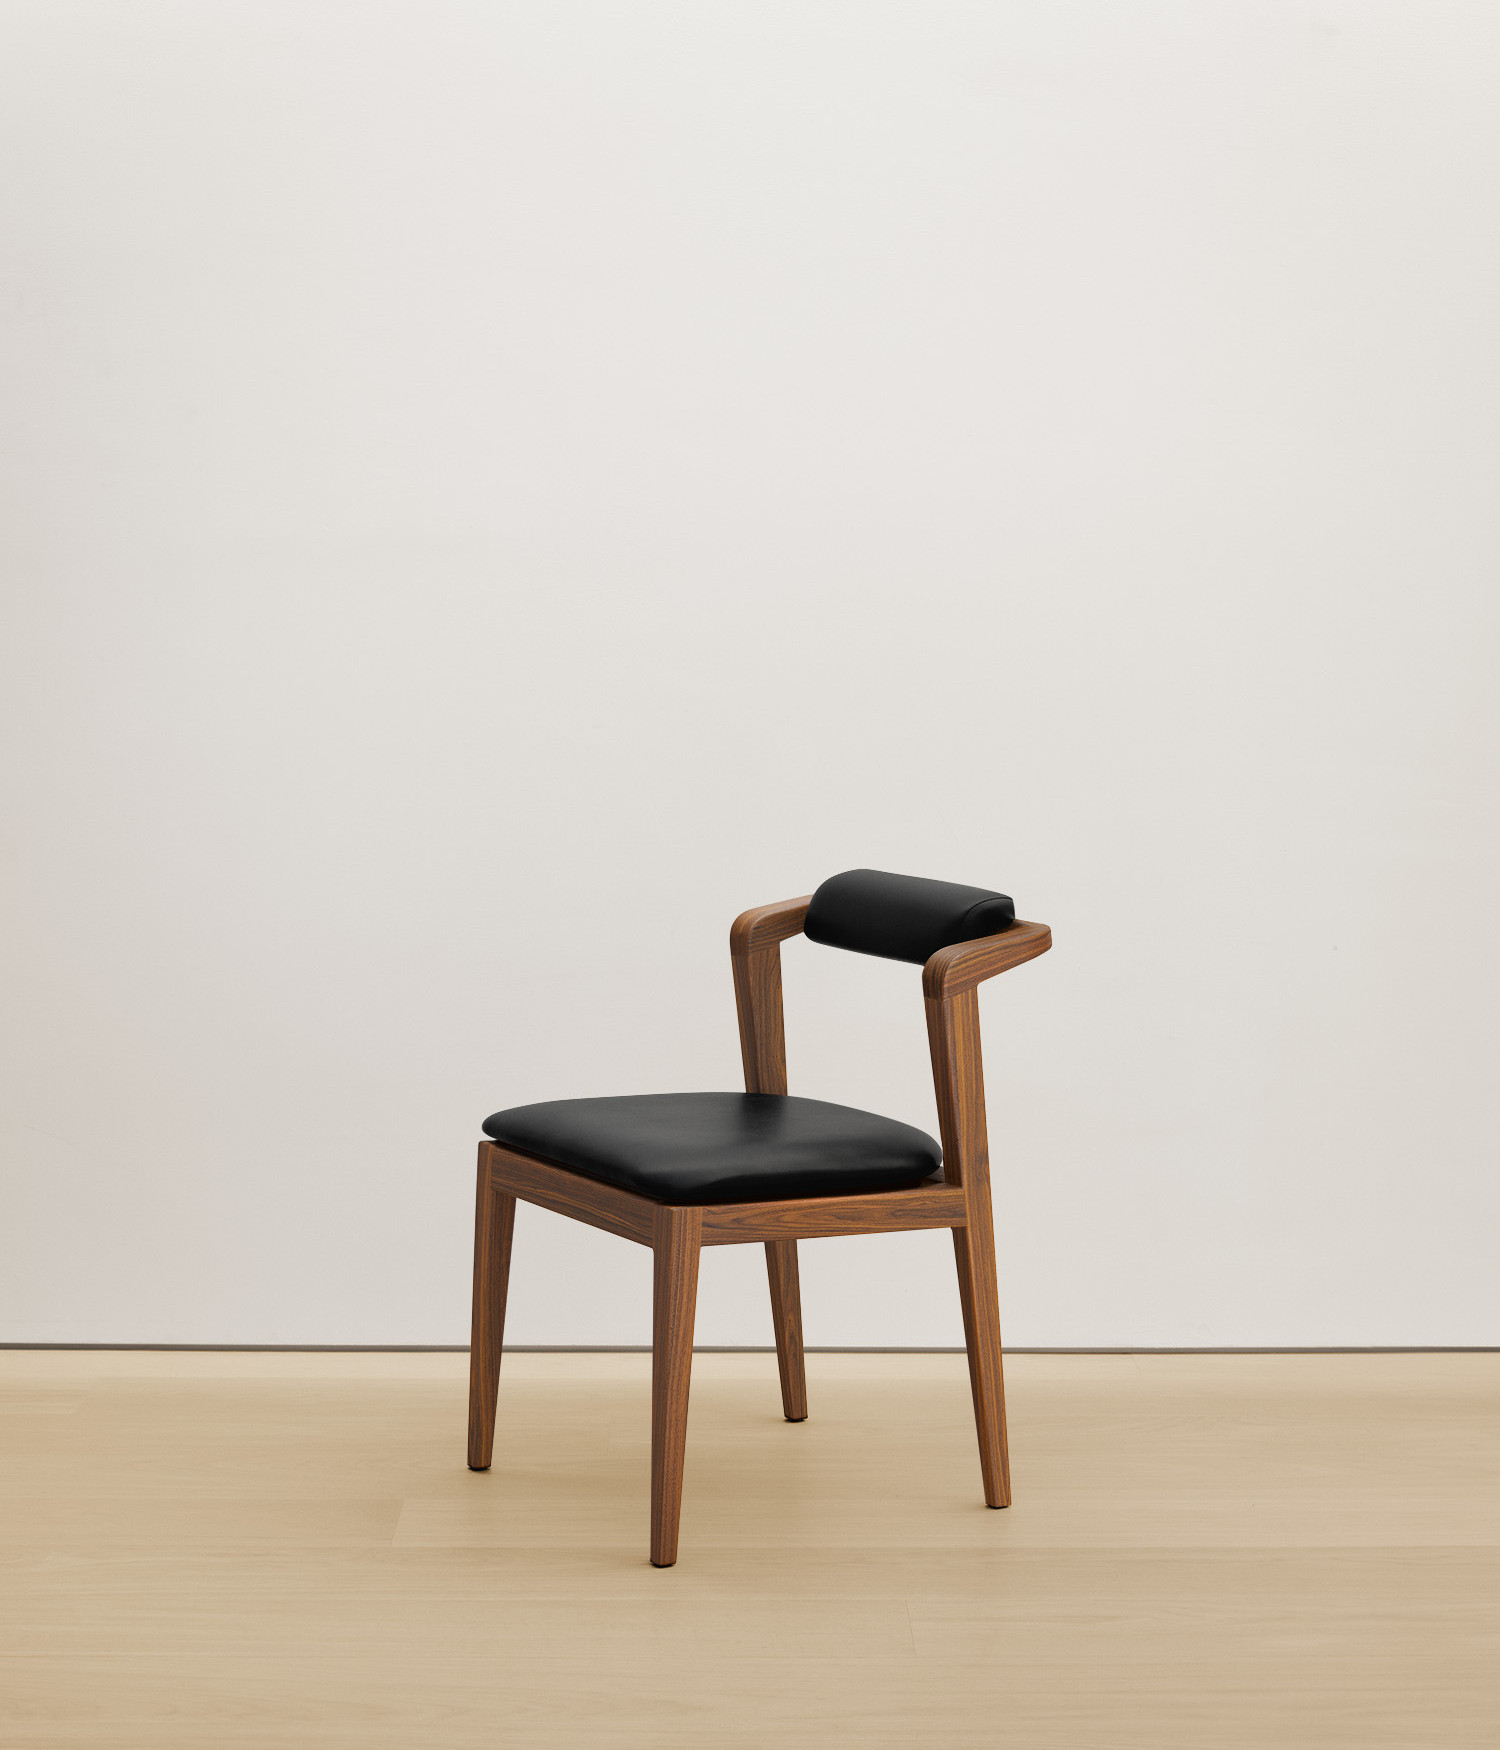  walnut chair with black color upholstered seat